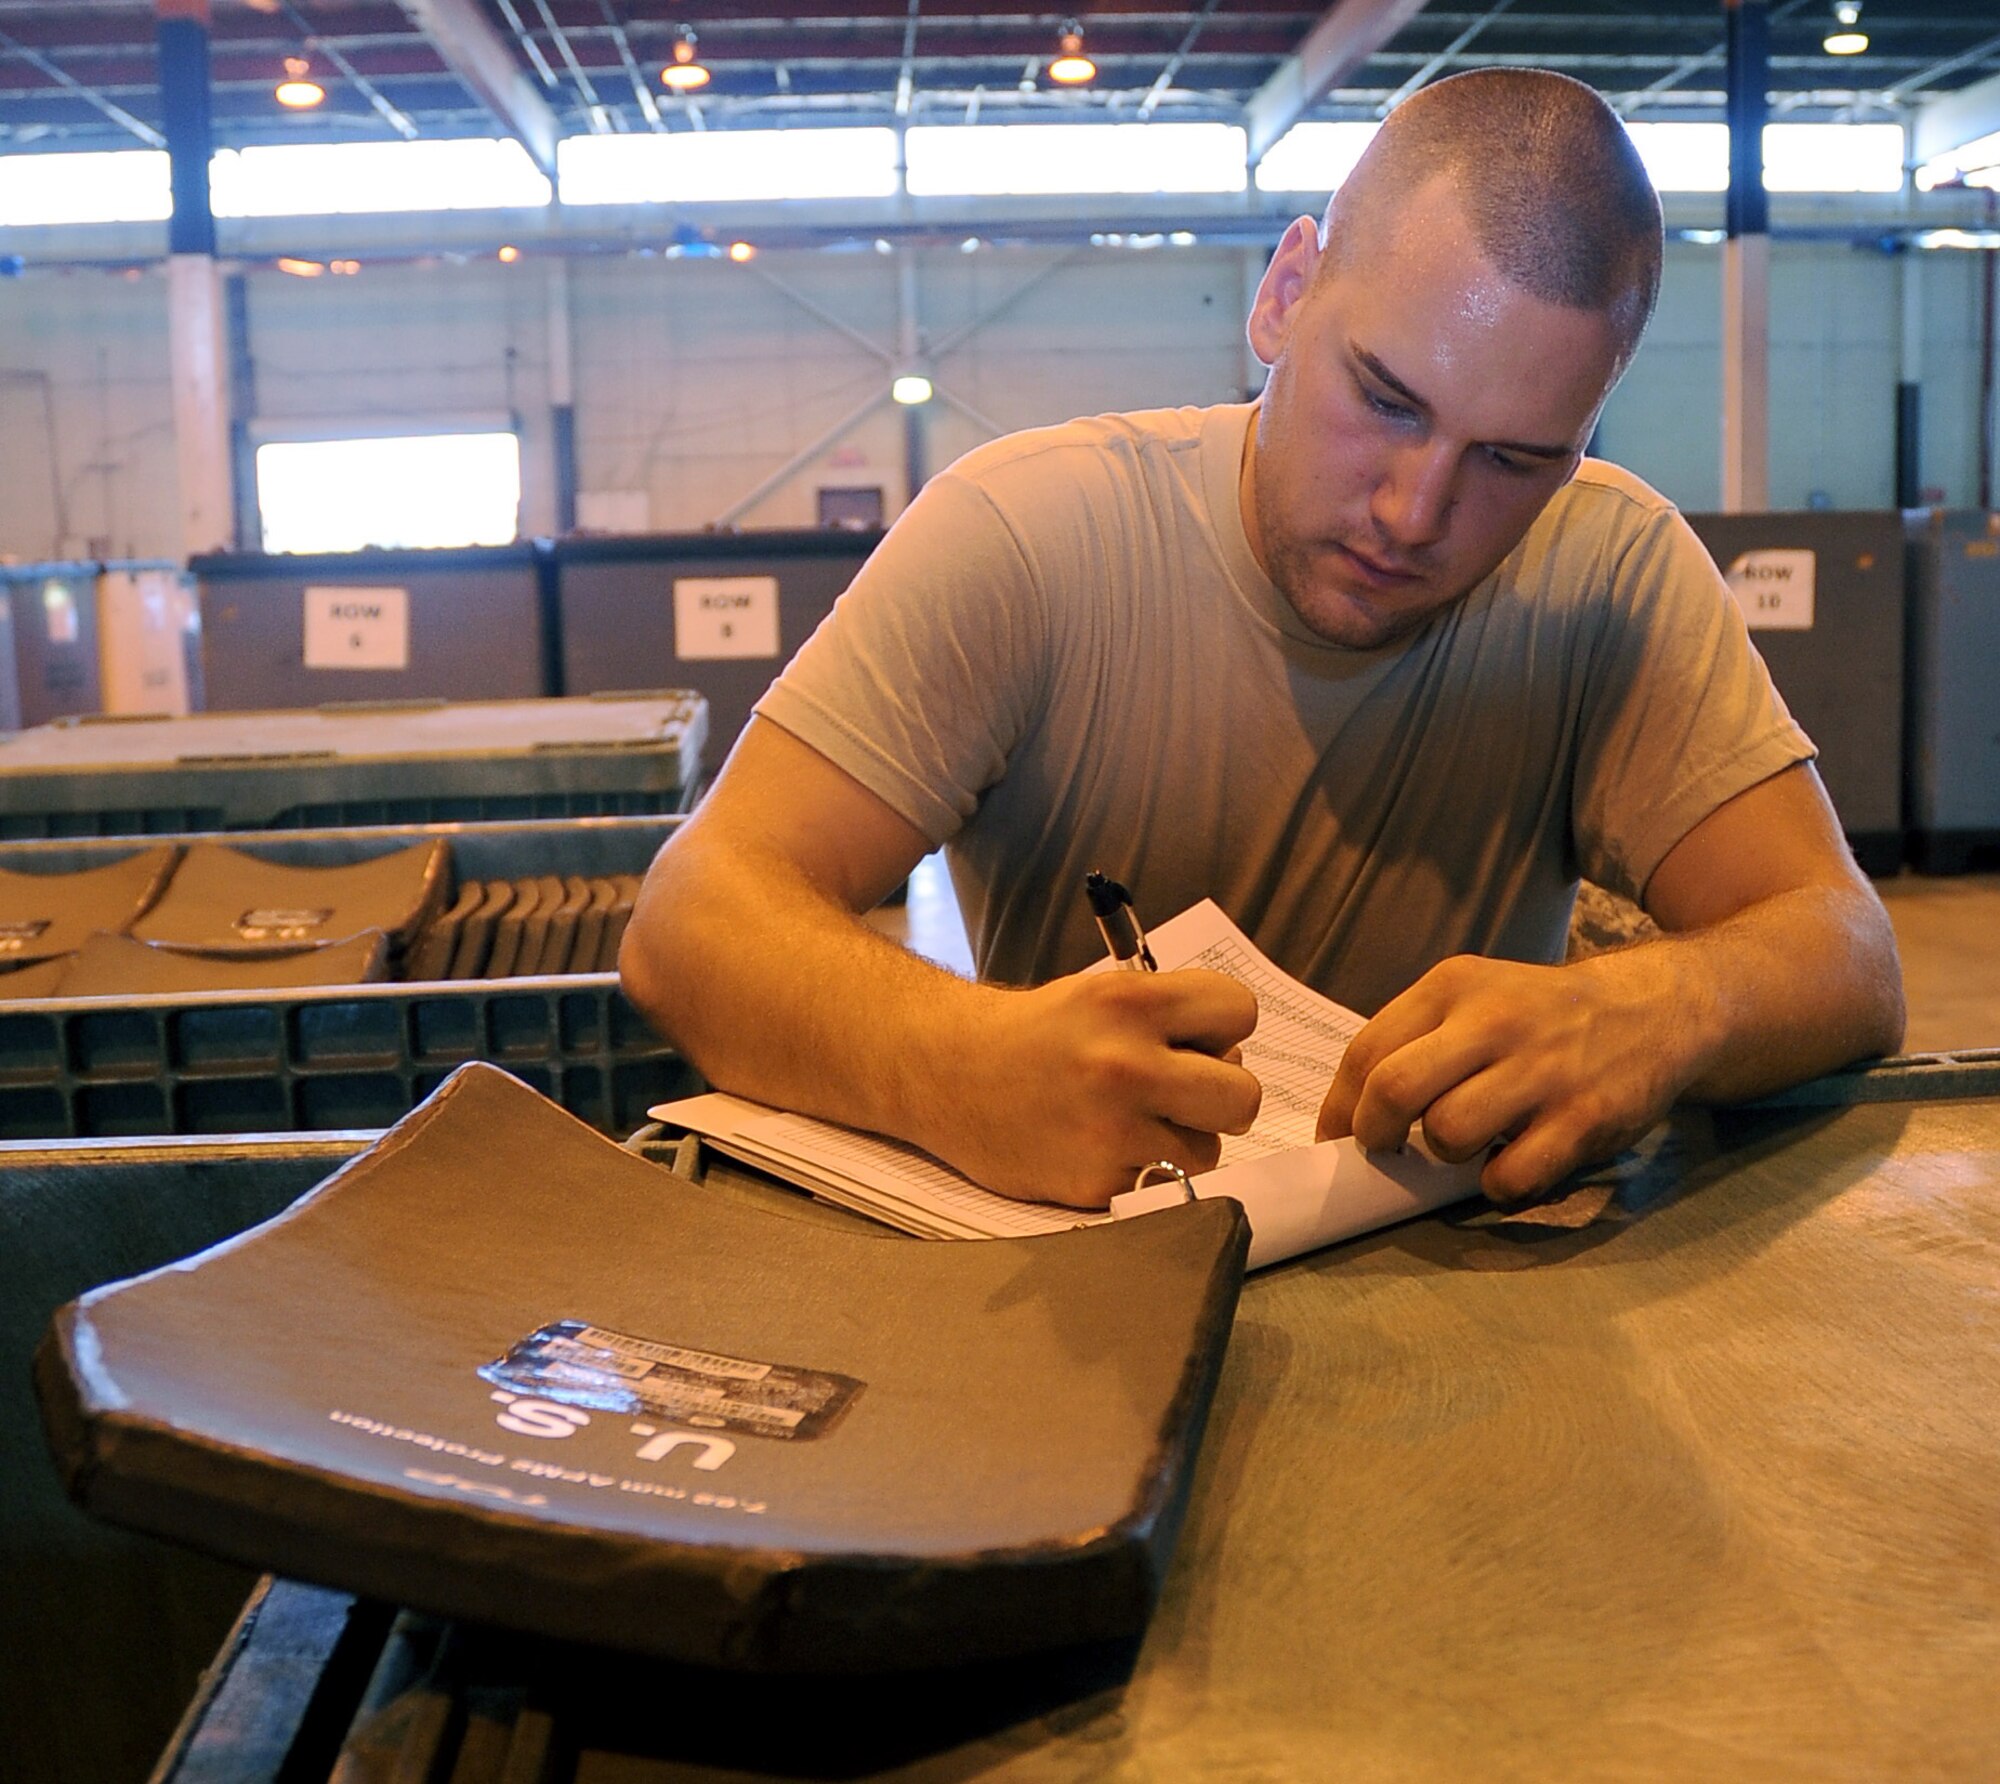 Senior Airman Justin Walczyk, 2nd Logistics Readiness Squadron mobility and weapons section, inventories small arms protective inserts on Barksdale Air Force Base, La., Aug. 17. All individual protective equipment that is received or returned to the 2 LRS warehouse is updated in a large spreadsheet for proper inventory. (U.S. Air Force photo/Senior Airman Amber Ashcraft) (RELEASED)